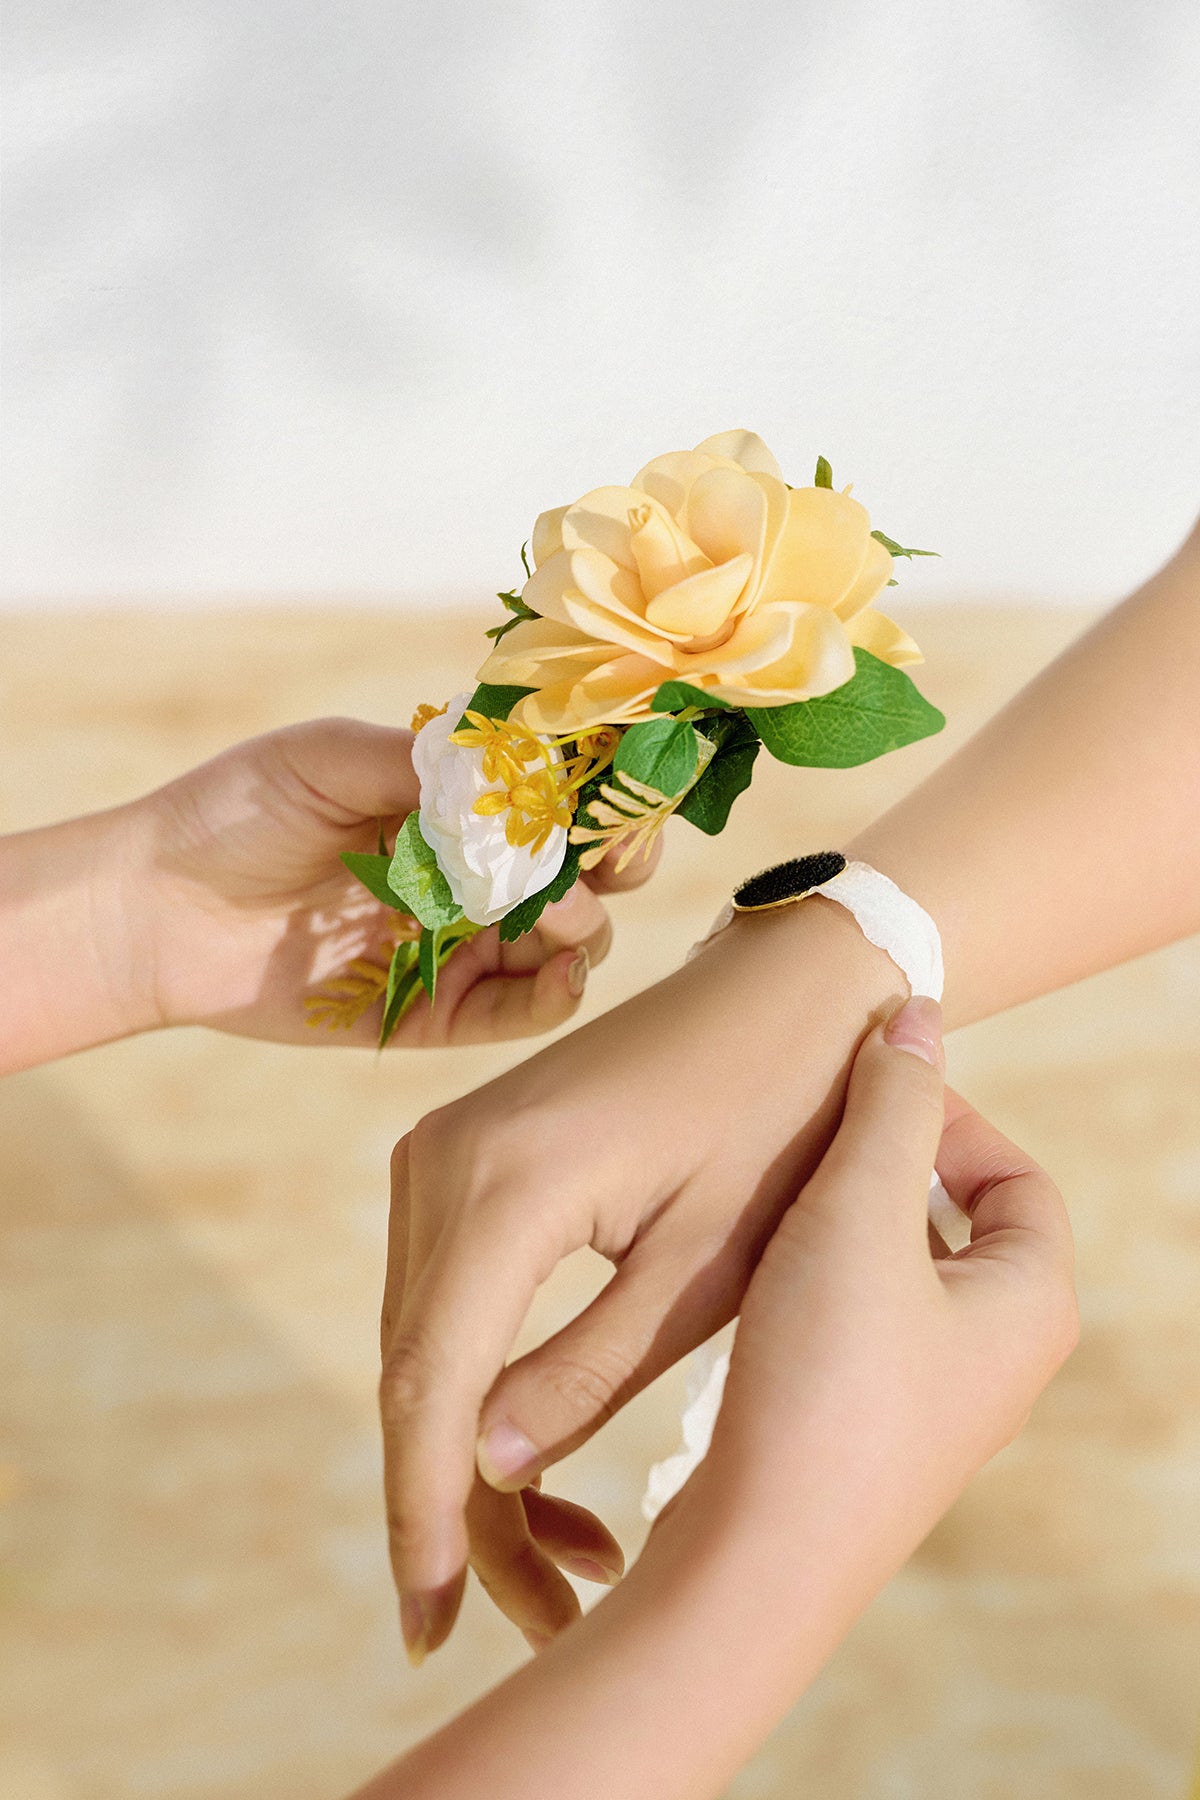 Wrist and Shoulder Corsages in Lemonade Yellow